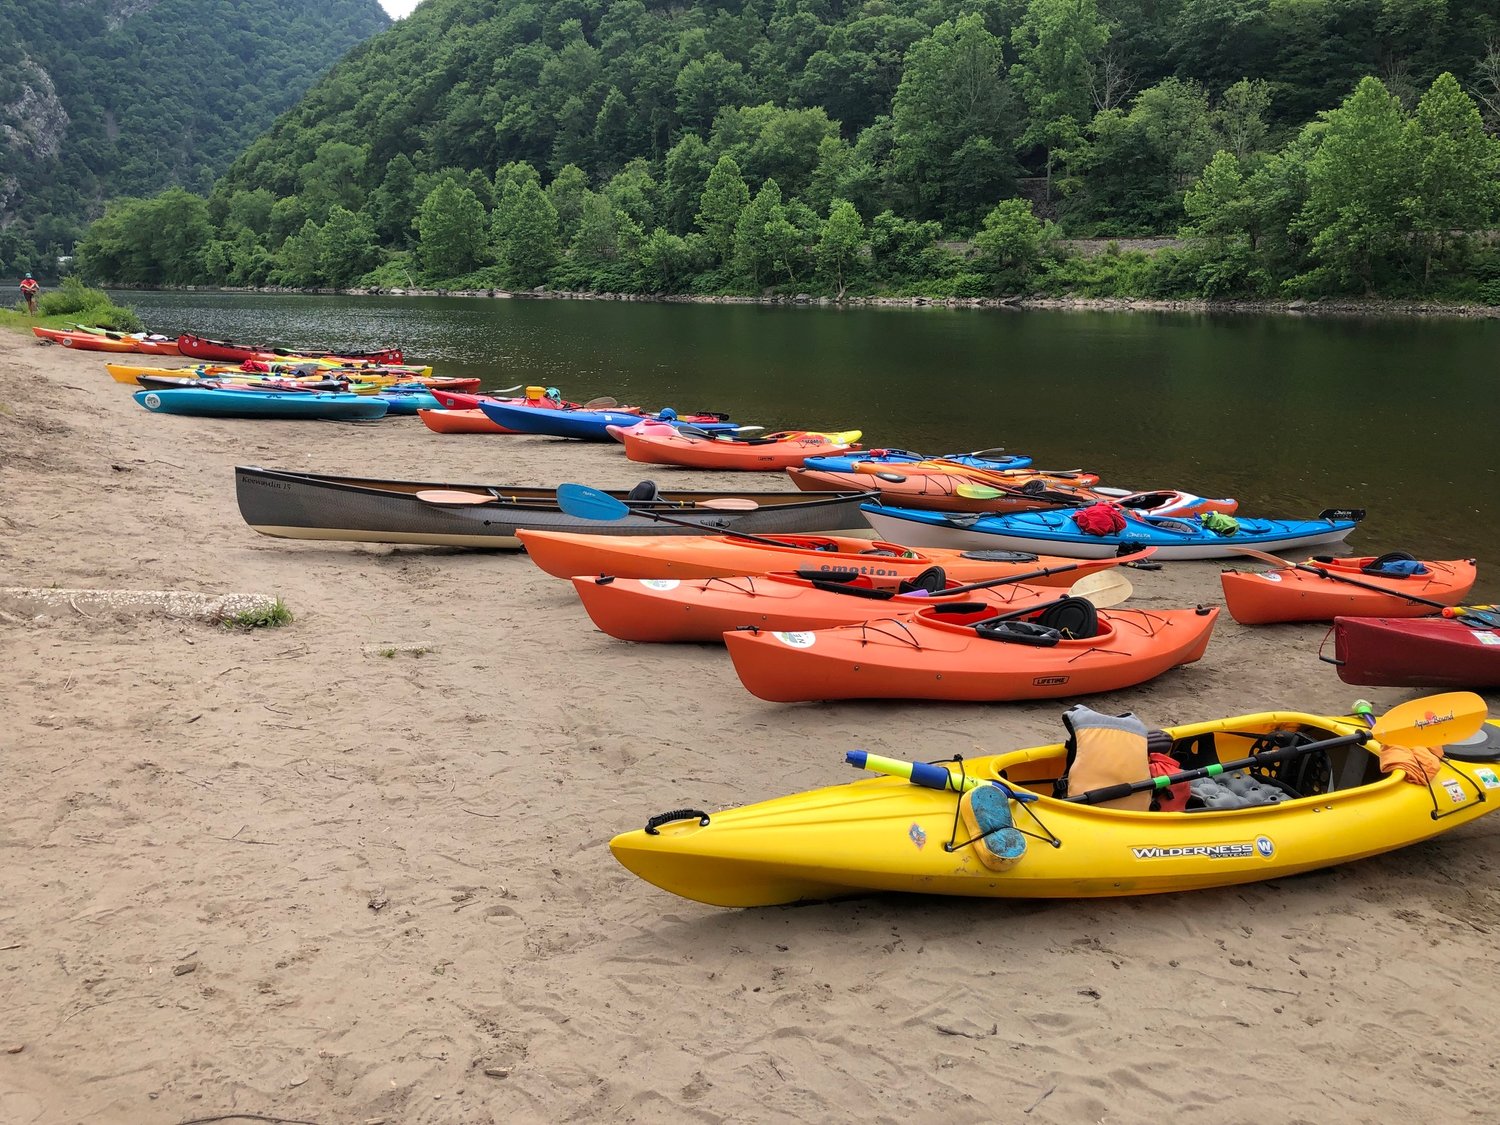 More than 100 kayakers on the 27th Annual Delaware River Sojourn, an eight-day journey along the Delaware River, stopped at the Kittatinny Point Visitor Center for lunch and to learn more about the Delaware Water Gap National Recreation Area.